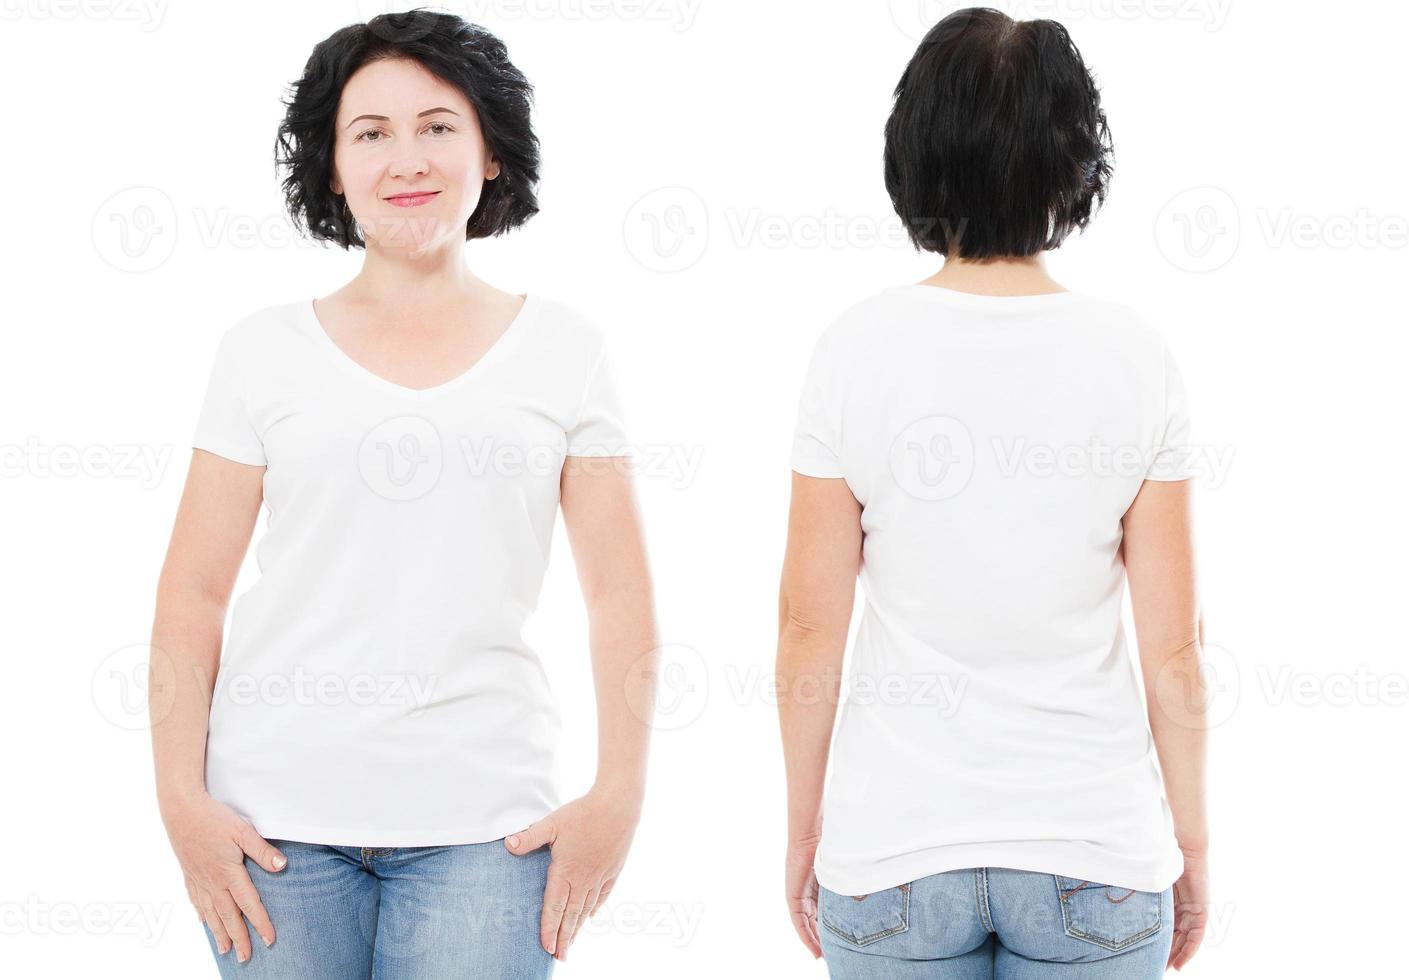 Blank t-shirt set front, back, rear with female isolated on white background - woman photo